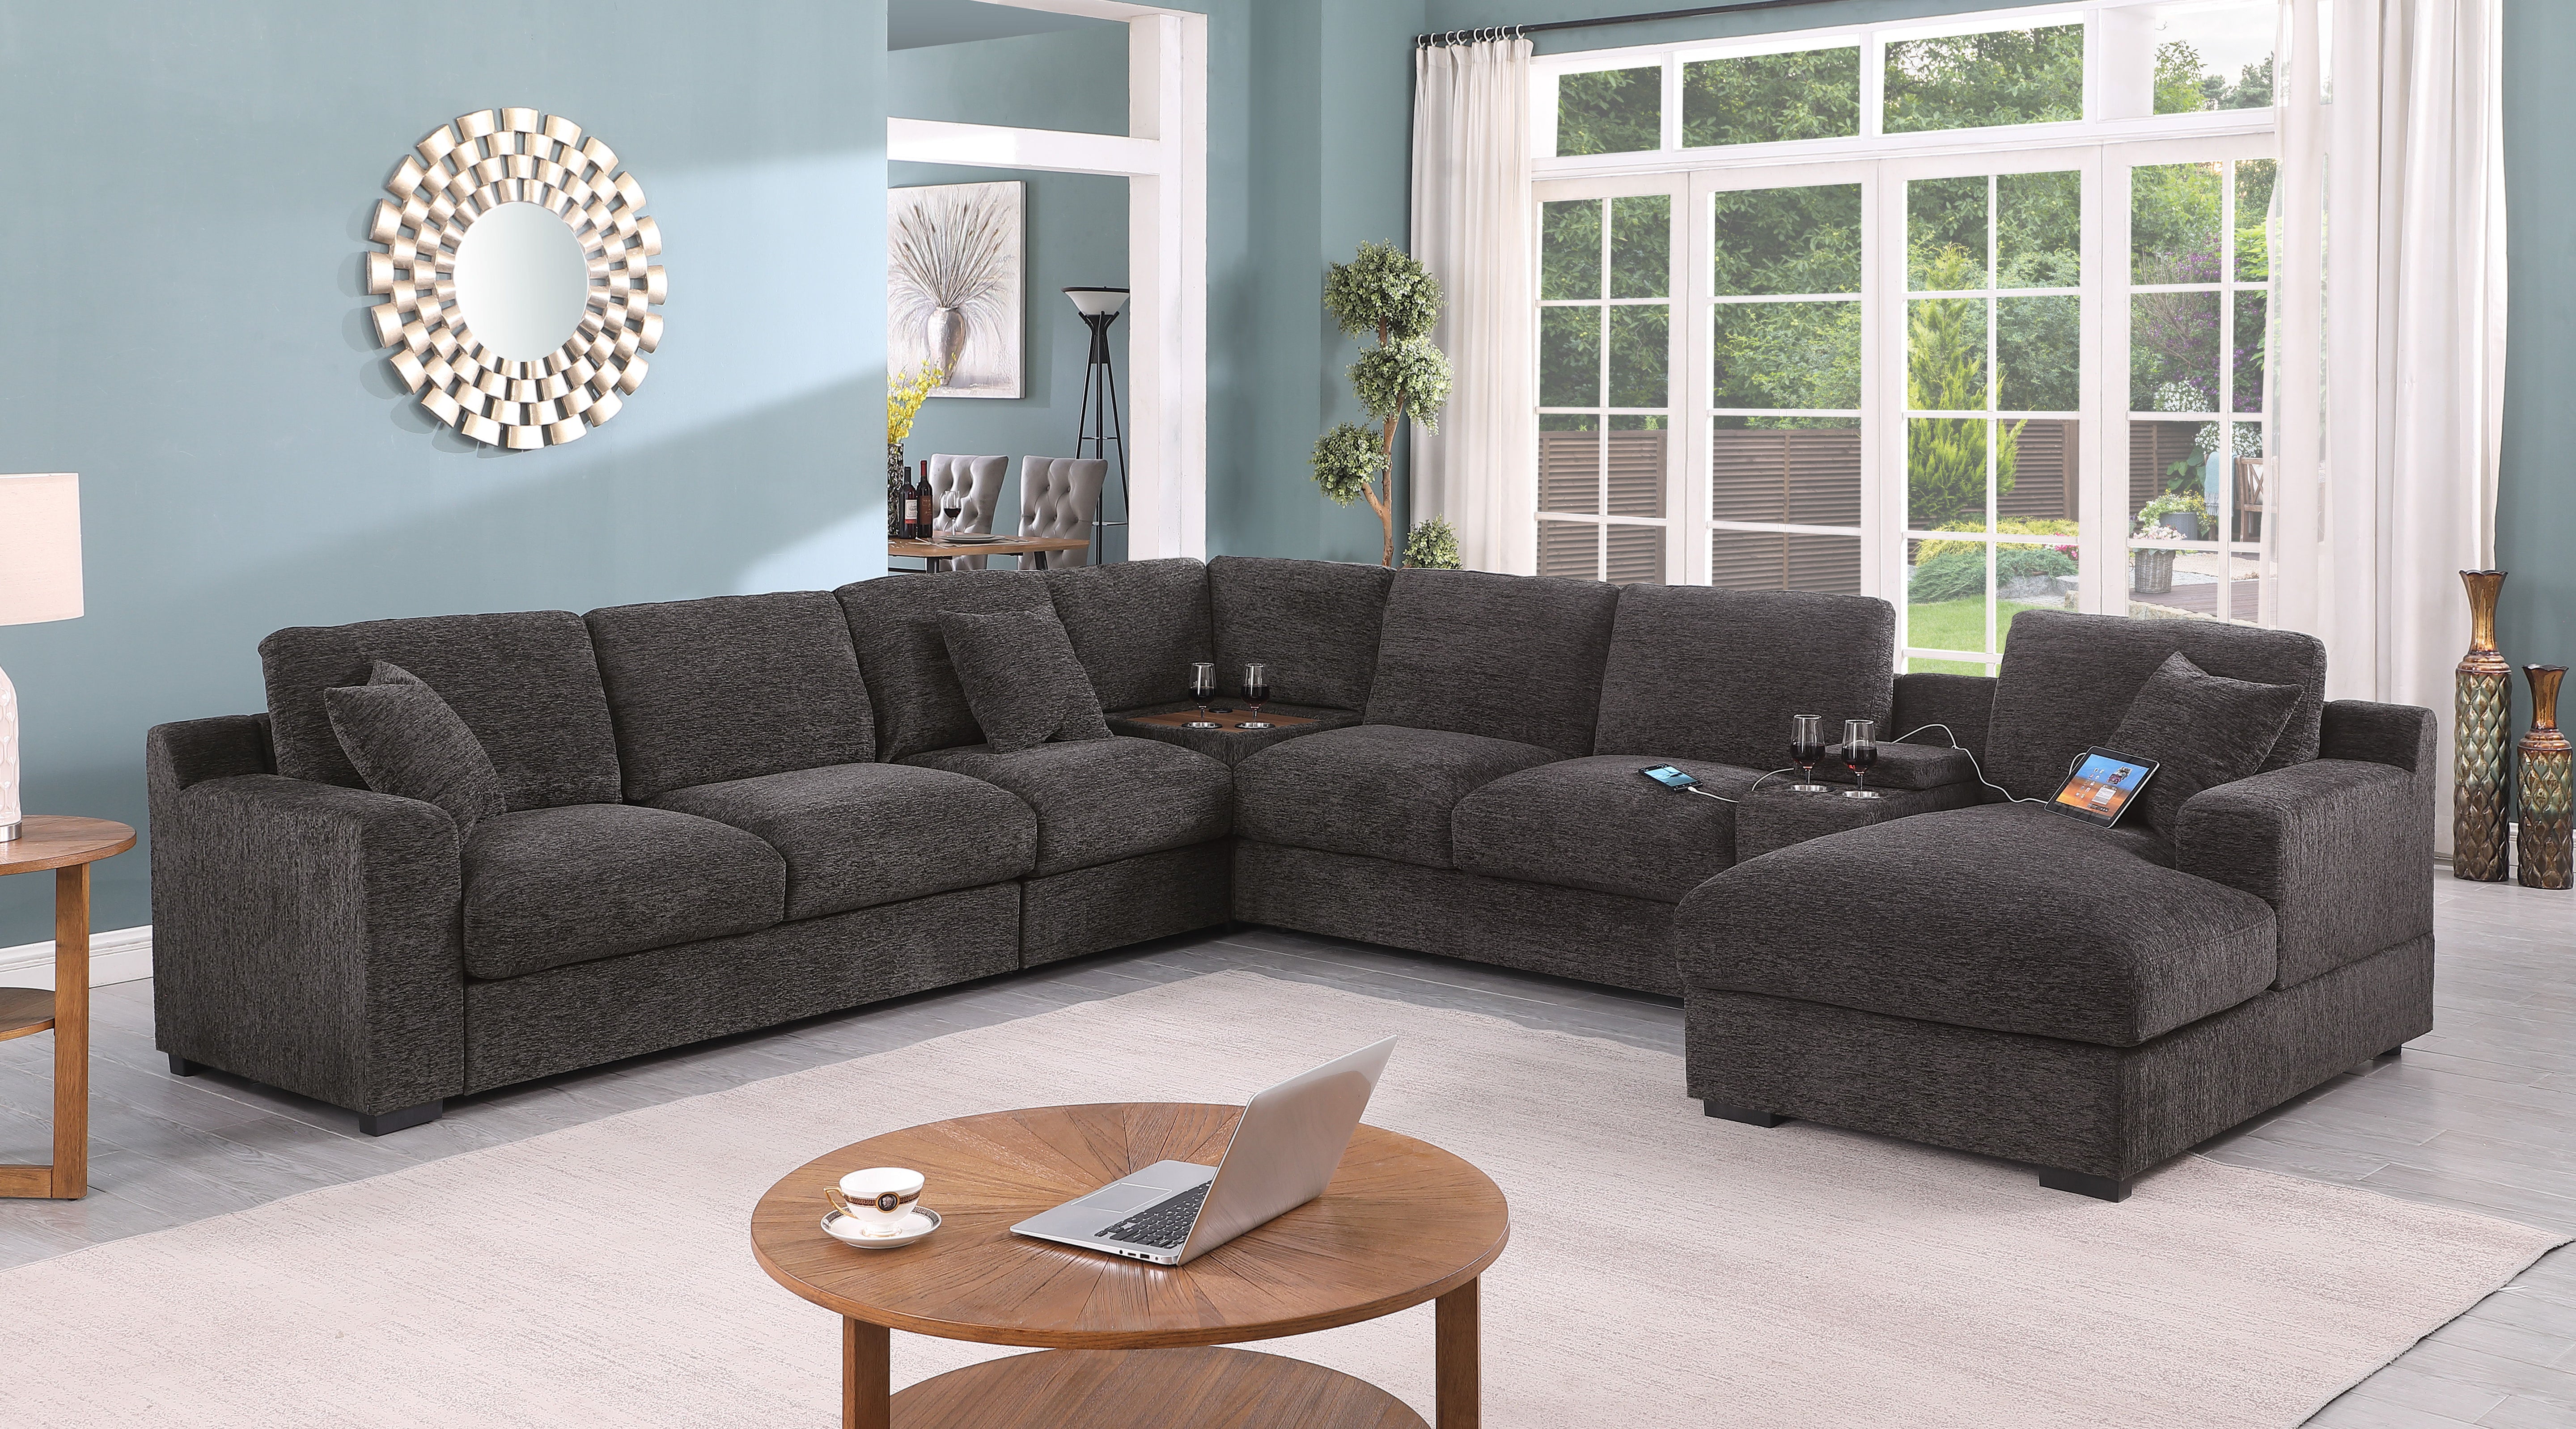 Celine - Chenille Fabric Corner Sectional Sofa With Right-Facing Chaise, Cupholders, And Charging Ports - Gray